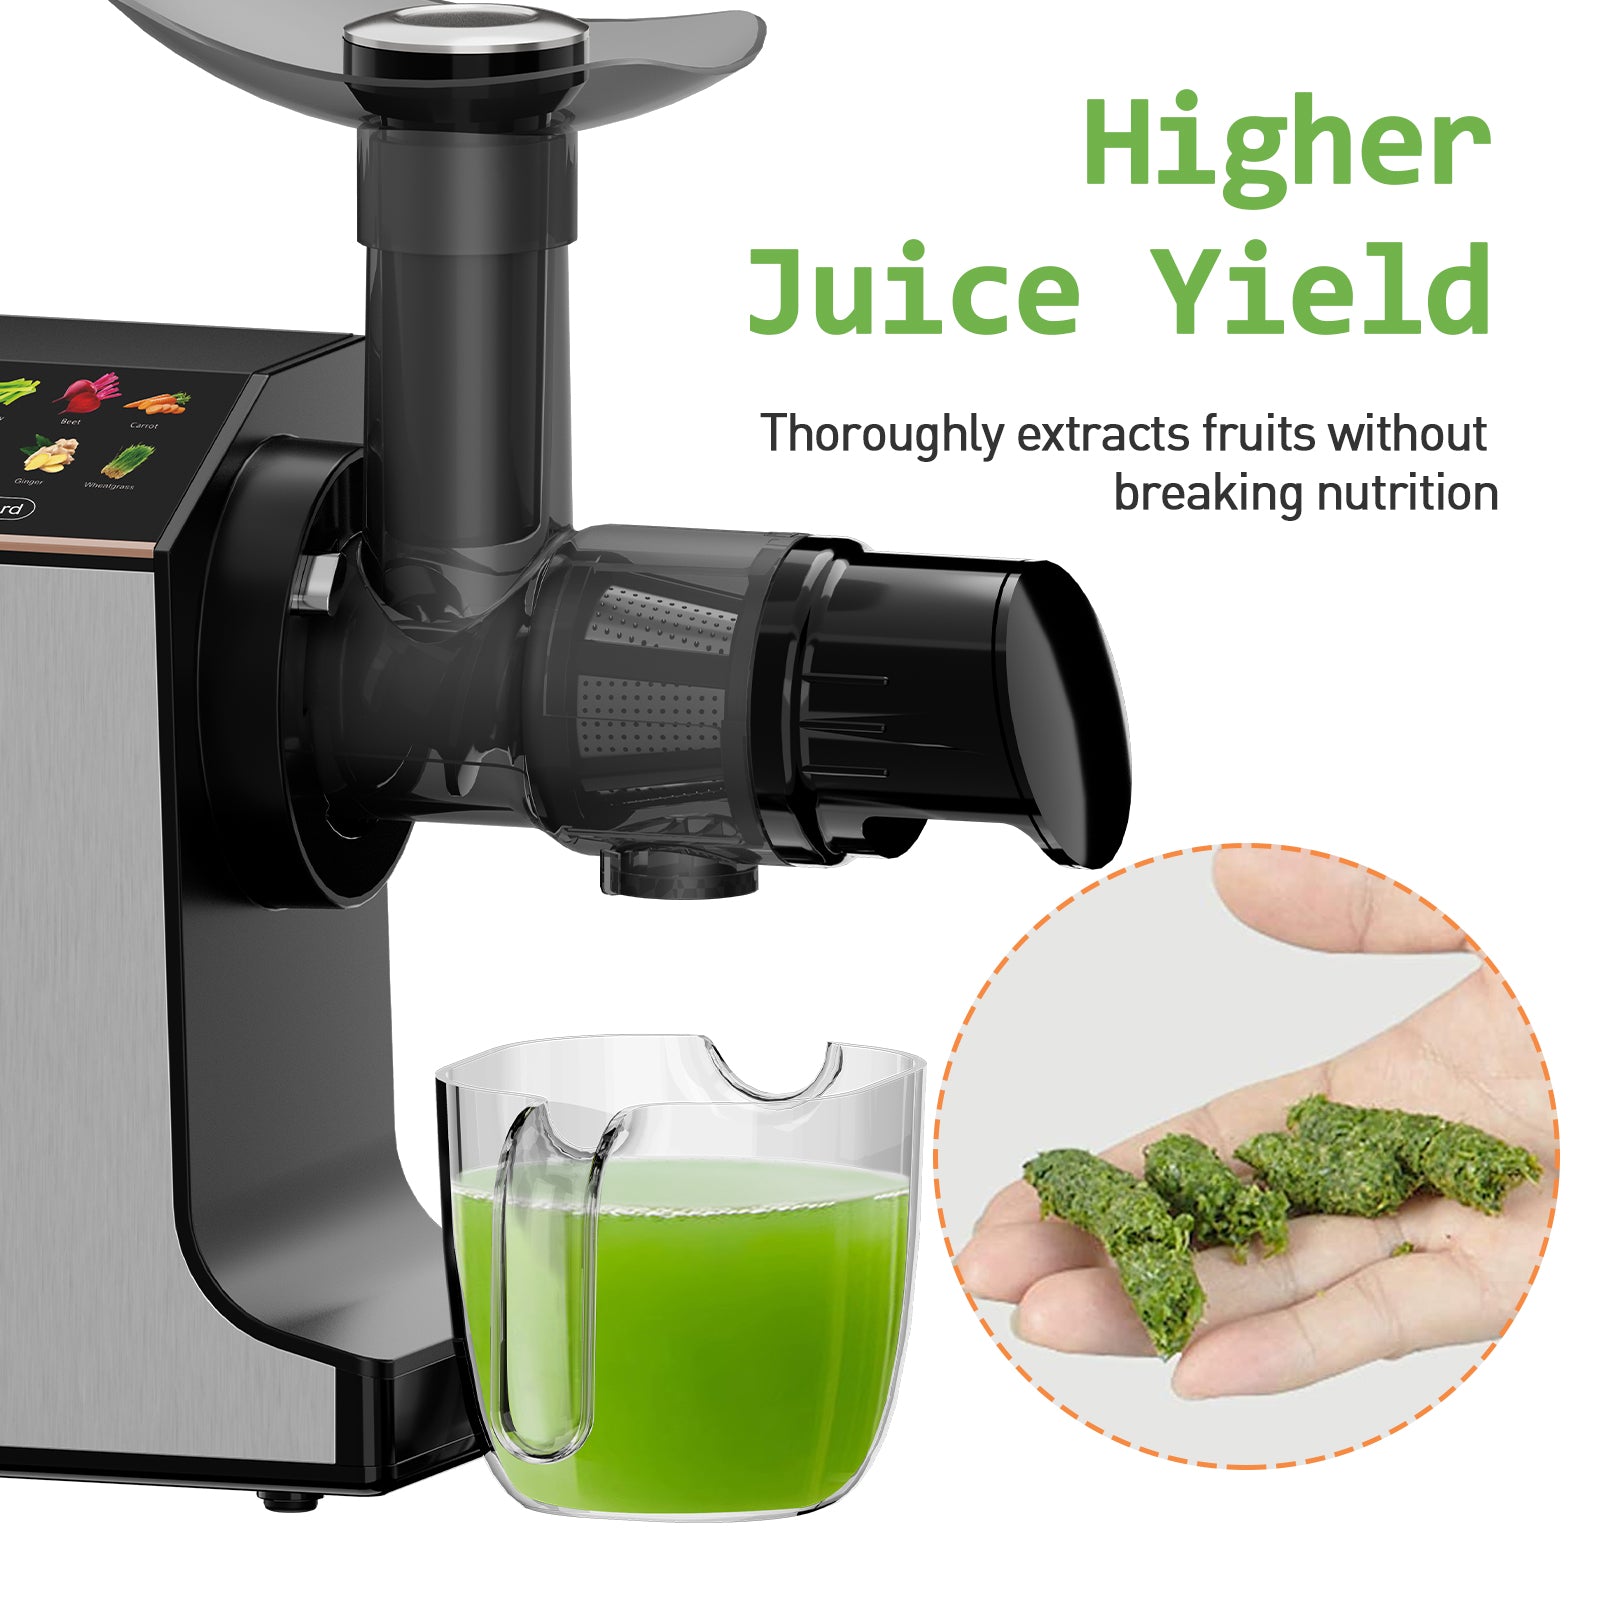 WHALL® Masticating Slow Juicer –Stainless Steel, Touchscreen with 2 Speed Modes